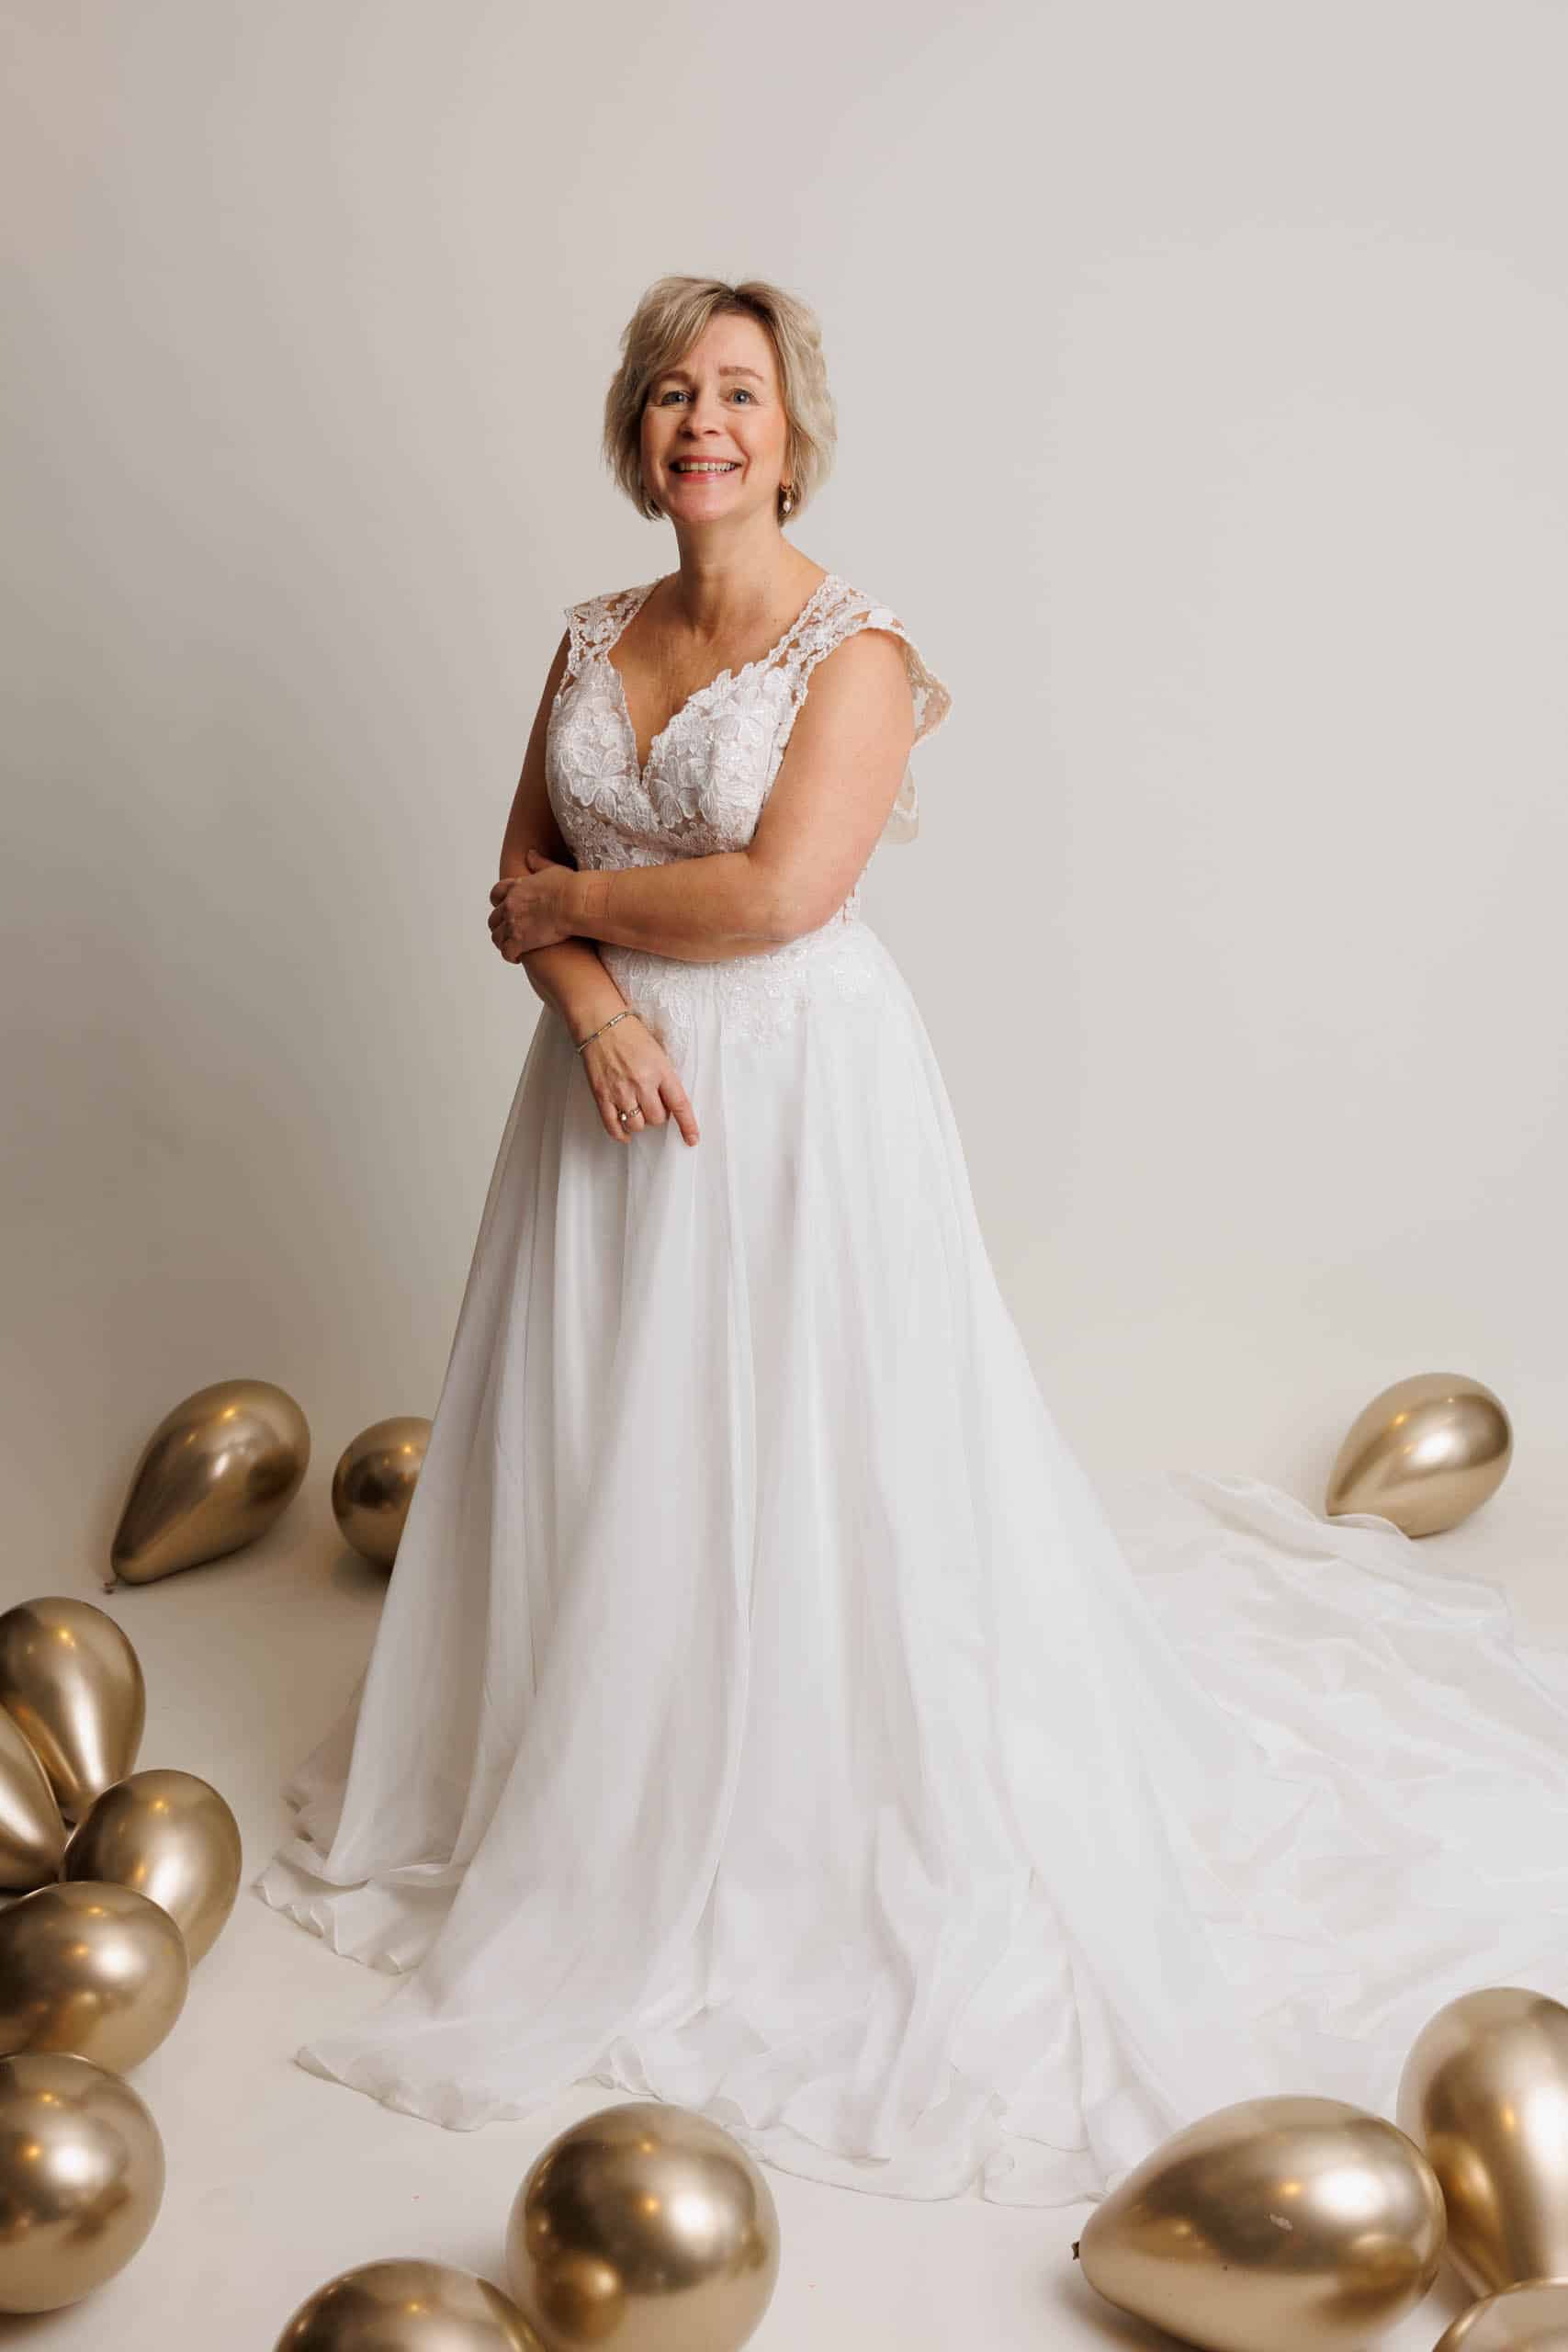 A woman in a wedding dress poses in front of gold balloons while trying on wedding dresses for fun.